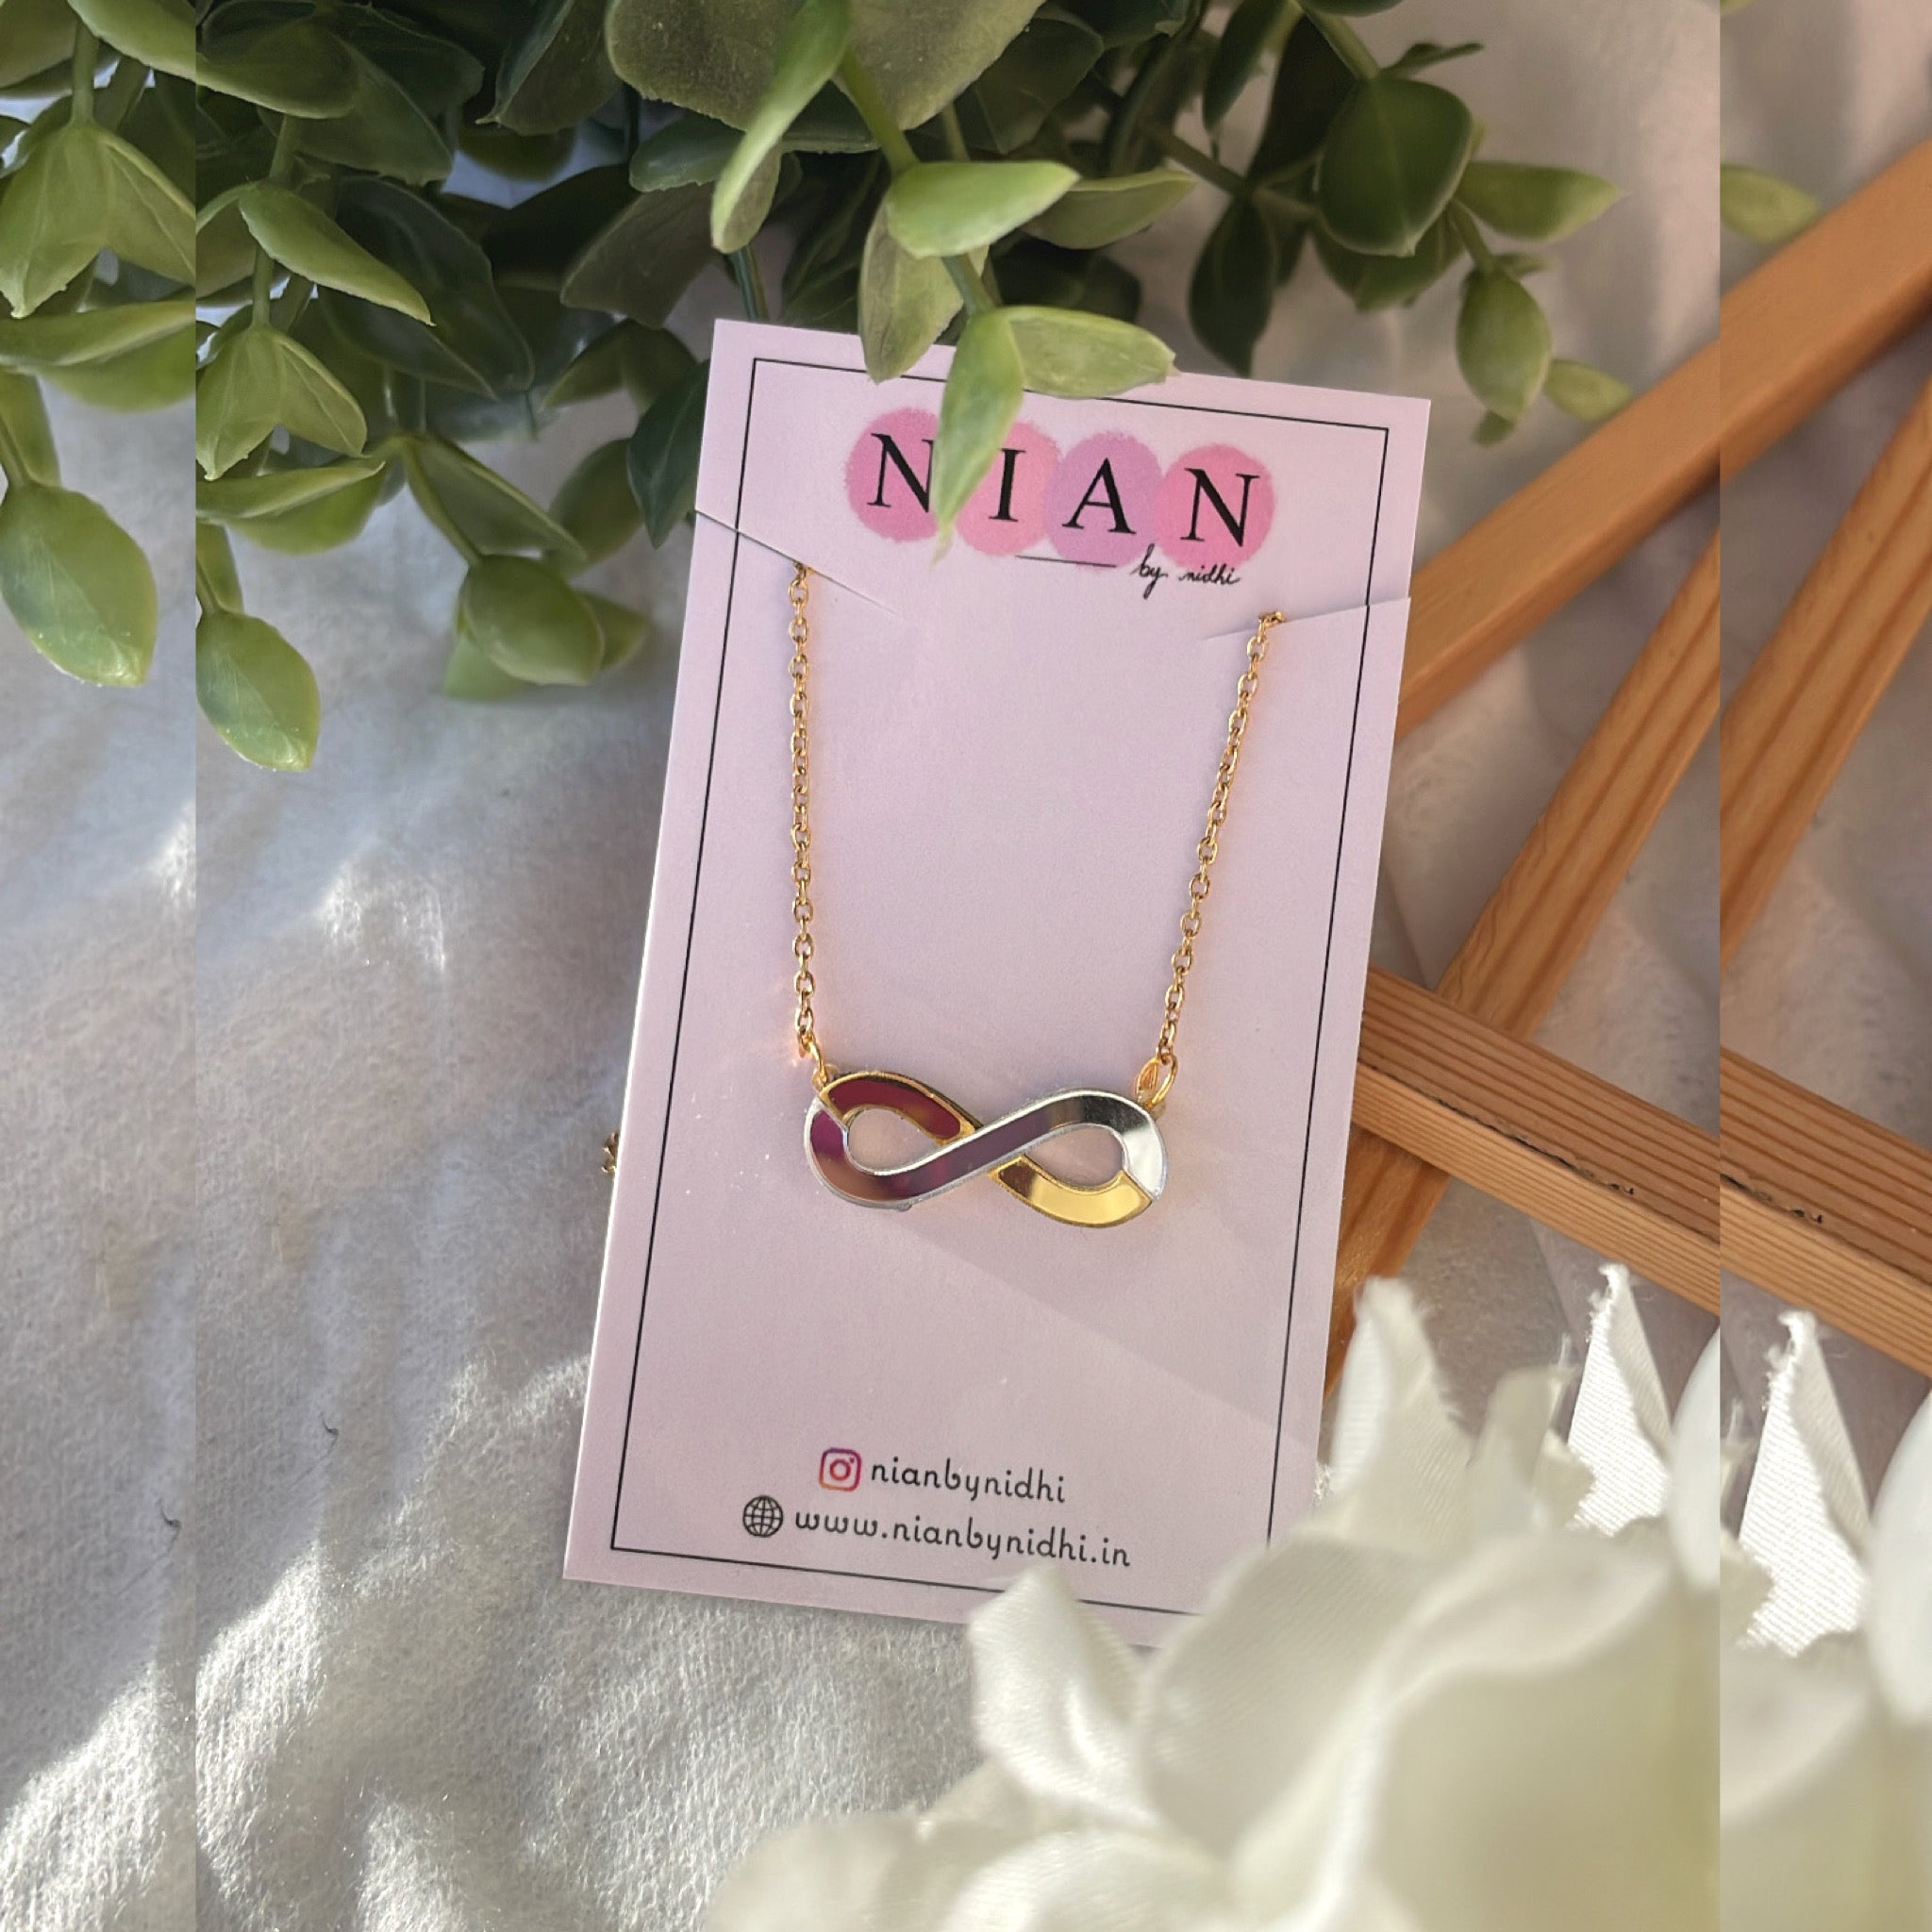 Infinity Necklace - Glossy Golden and Silver - Nian by Nidhi - placed in a white and green background